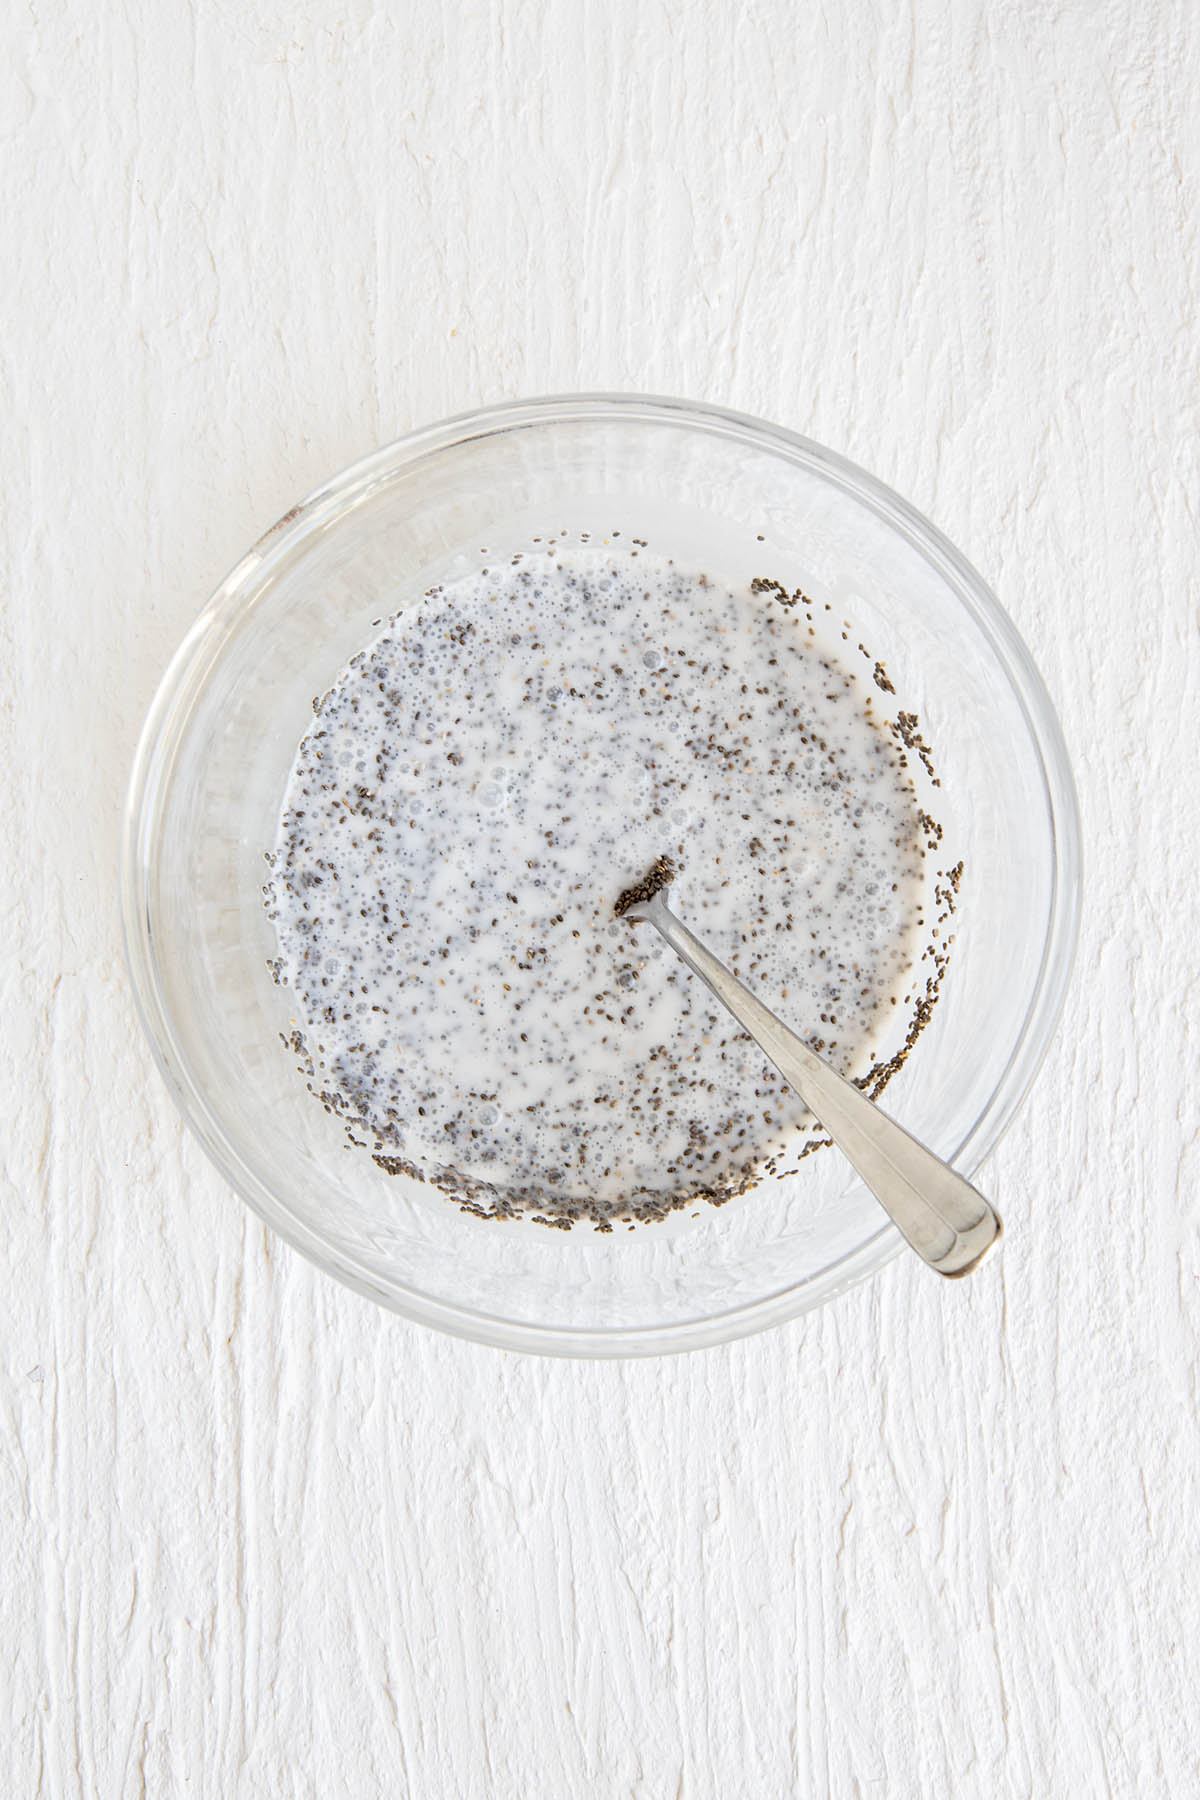 Chia seeds and coconut milk in a bowl after mixing.